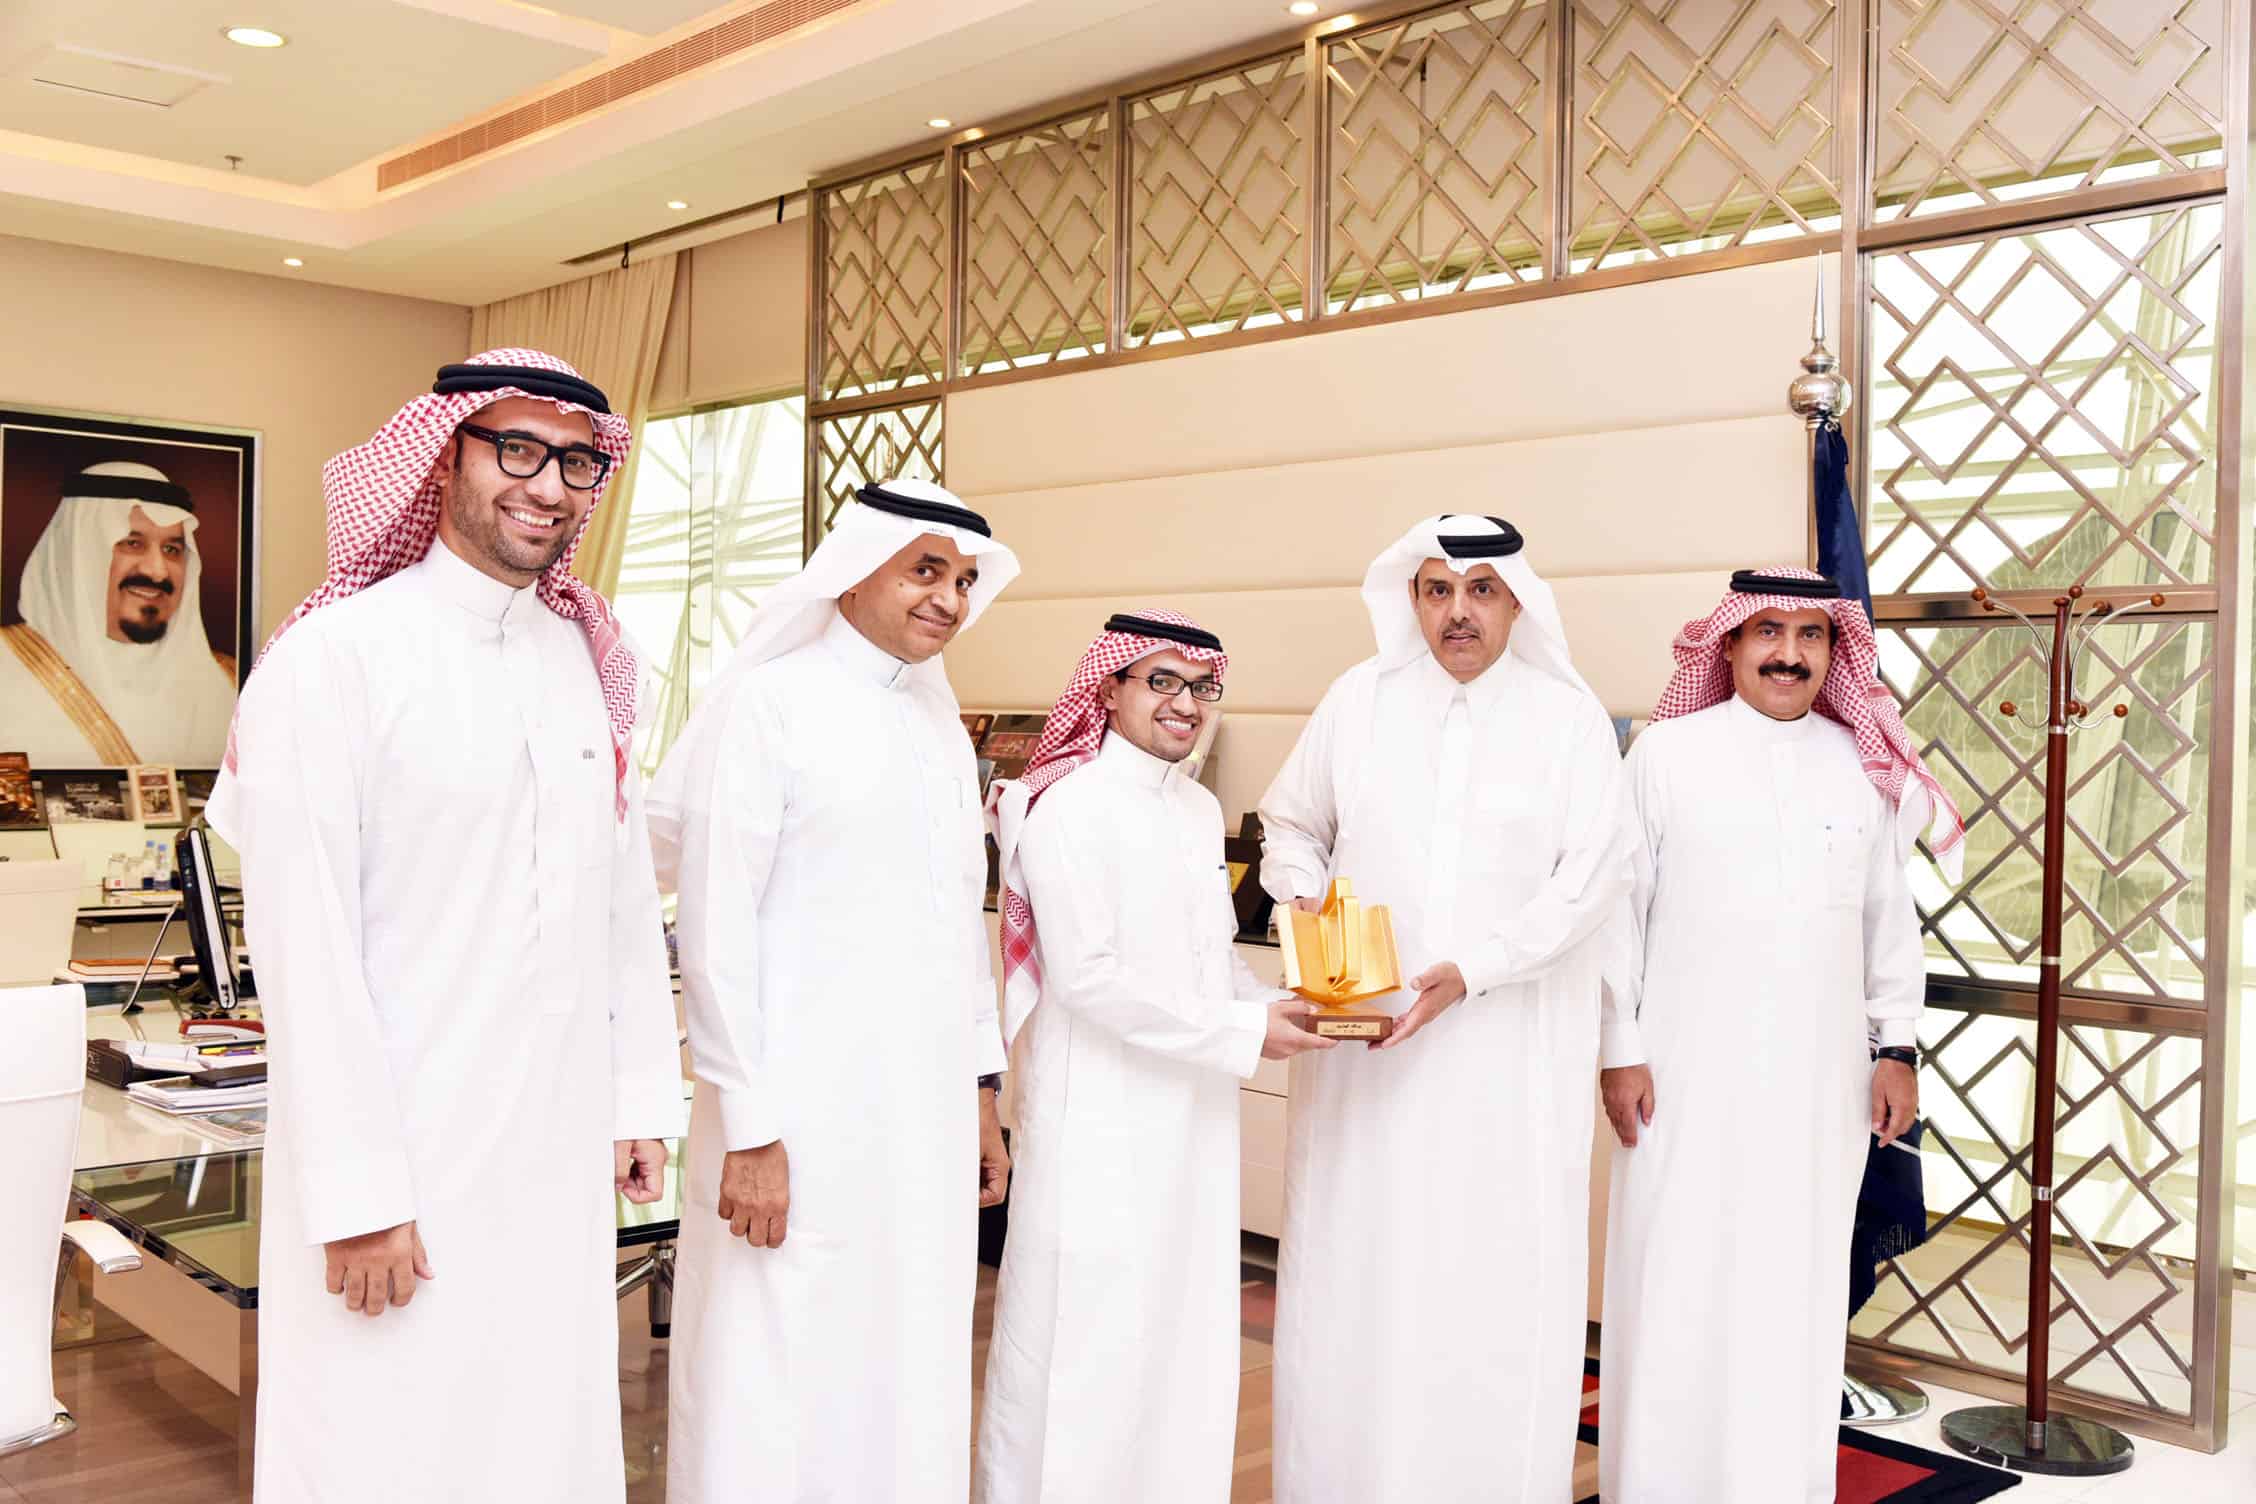 ​His Highness the Chairman of Board of Trustees Honors the Student Almoshwah for Winning the Title of "The Year Reader"